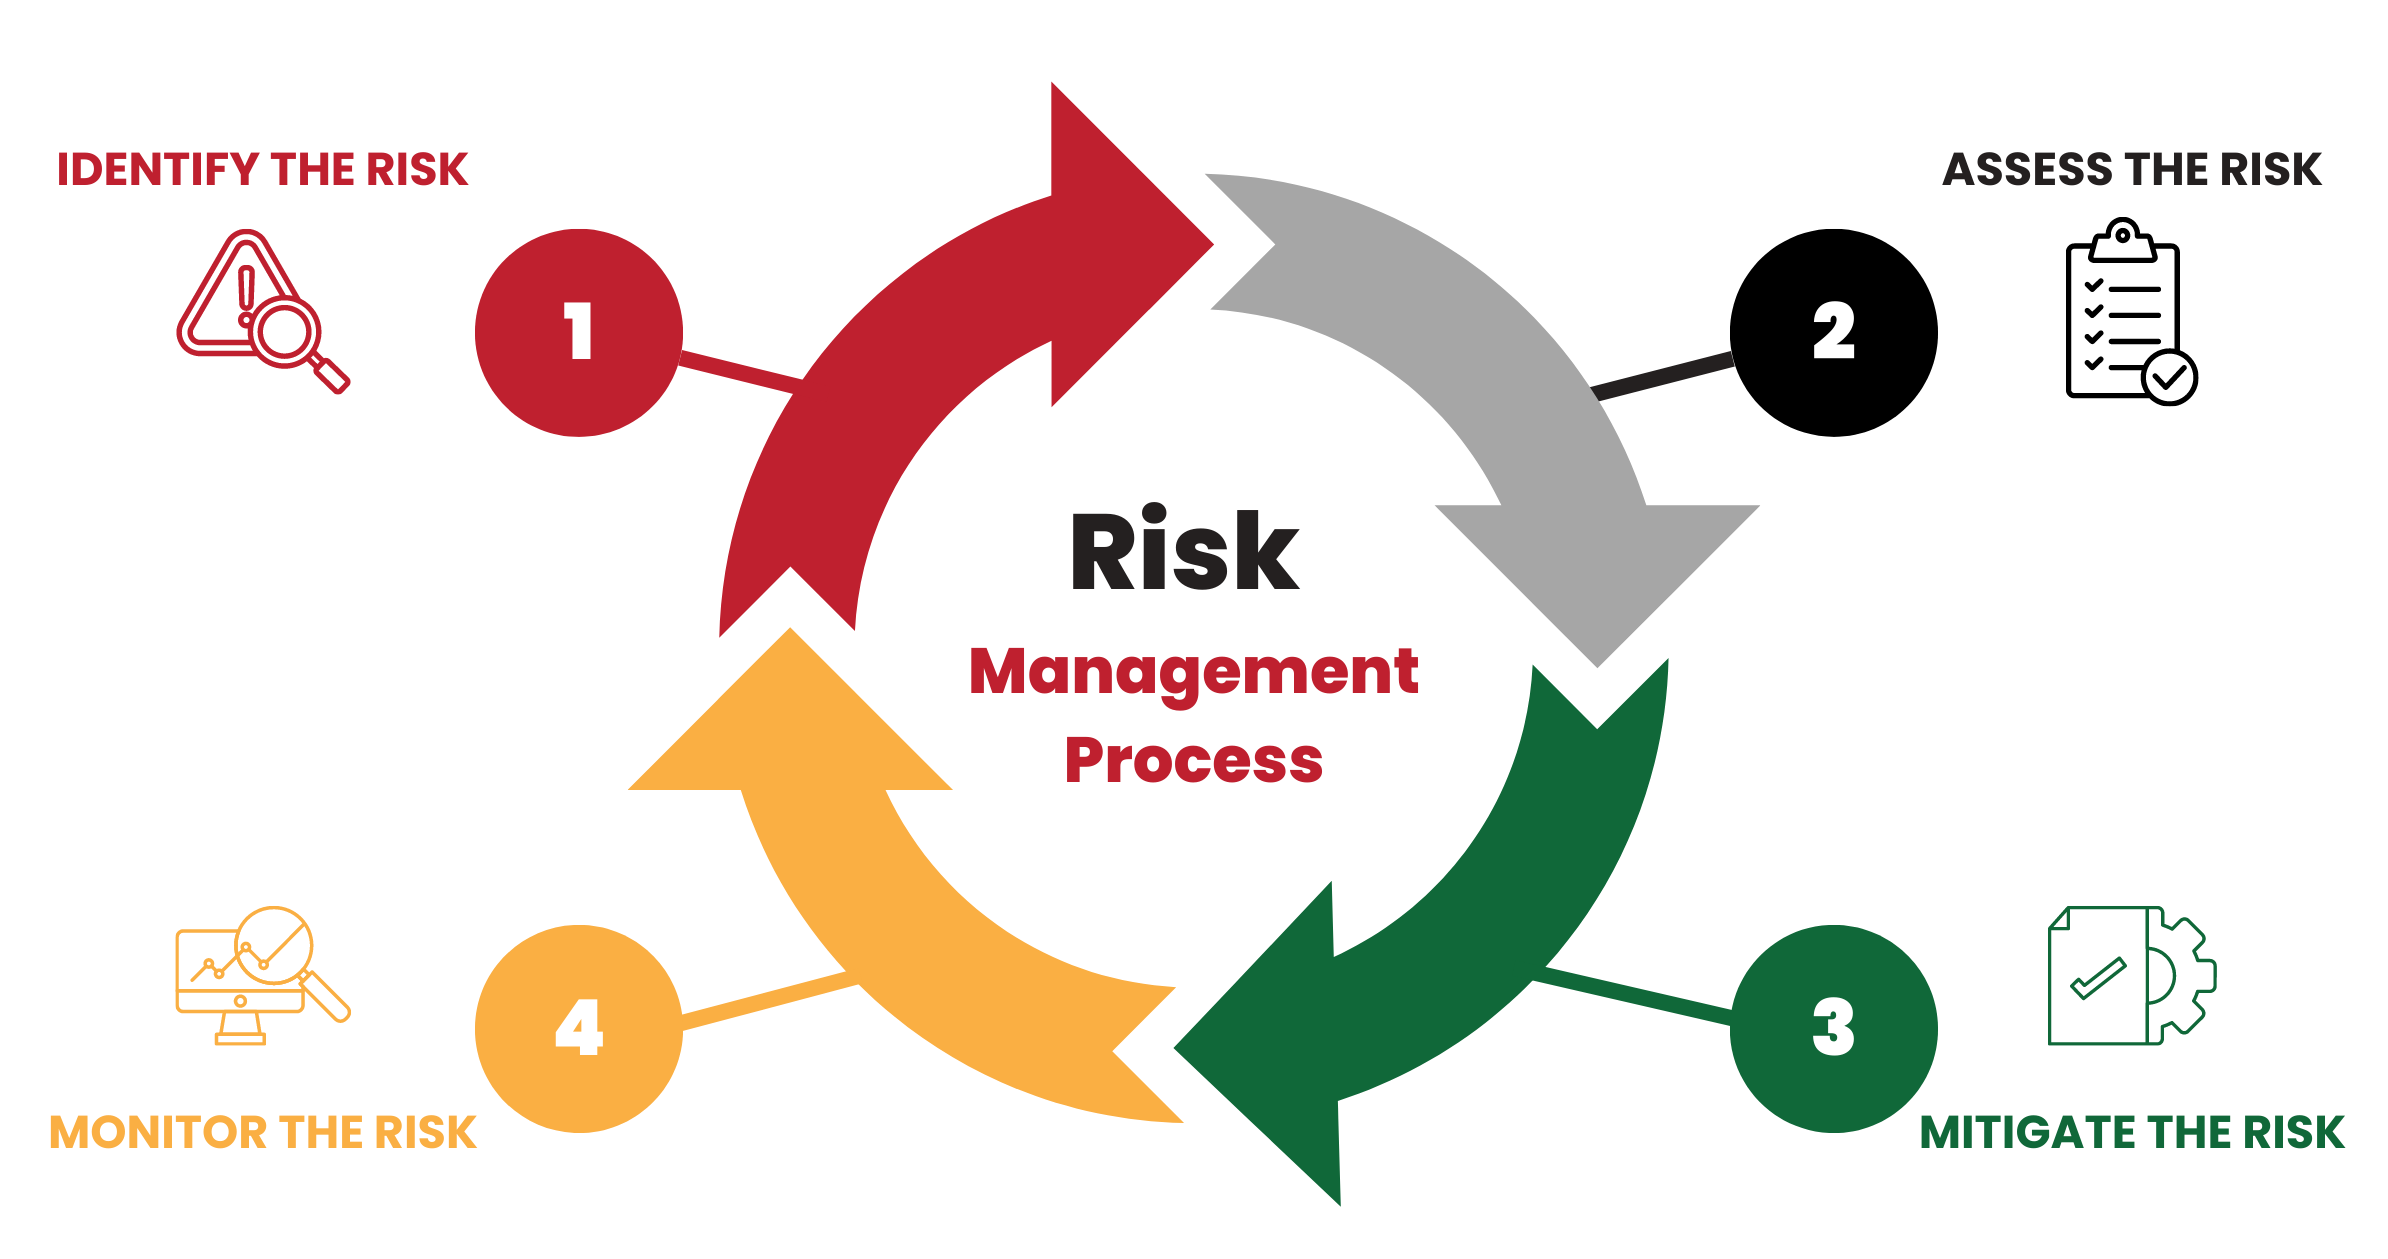 The risk management process includes identifying the risk, assessing the risk, mitigating the risk, and monitoring the risk. 